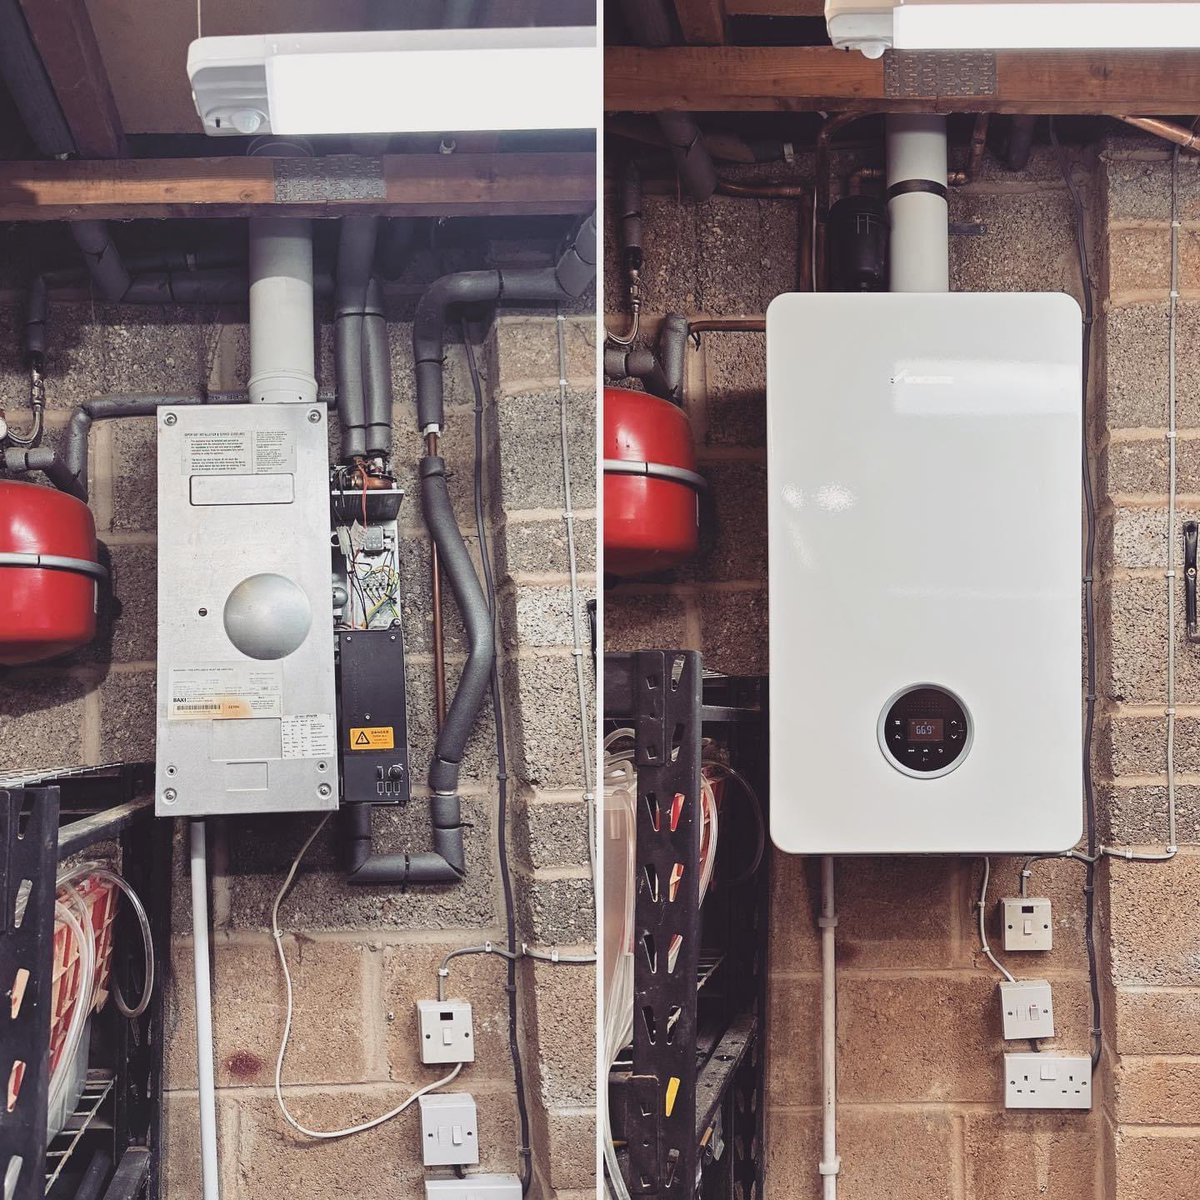 🔵 Time for a new boiler? 🔵

Get in contact with IMA Heating Solutions Ltd today for your free quotation. 

#worcesterbosch #heating #gas #plumbing #copper #boiler #winter #gasengineer #plumber #imaheatingsolutions